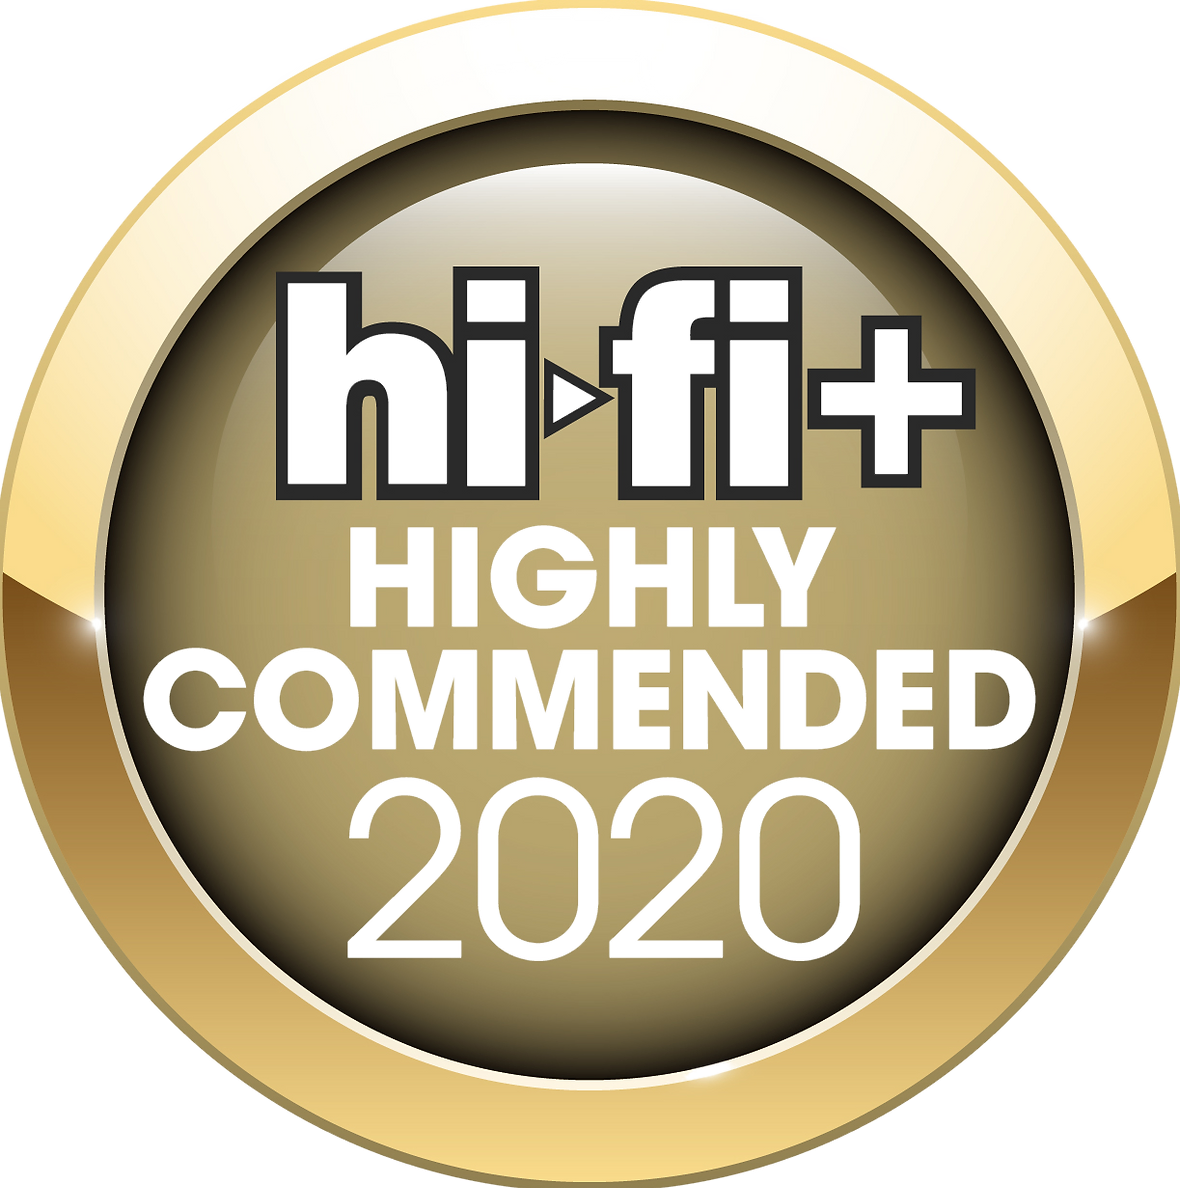 HiFi+_Awards_Commended_190_2020_edited_p